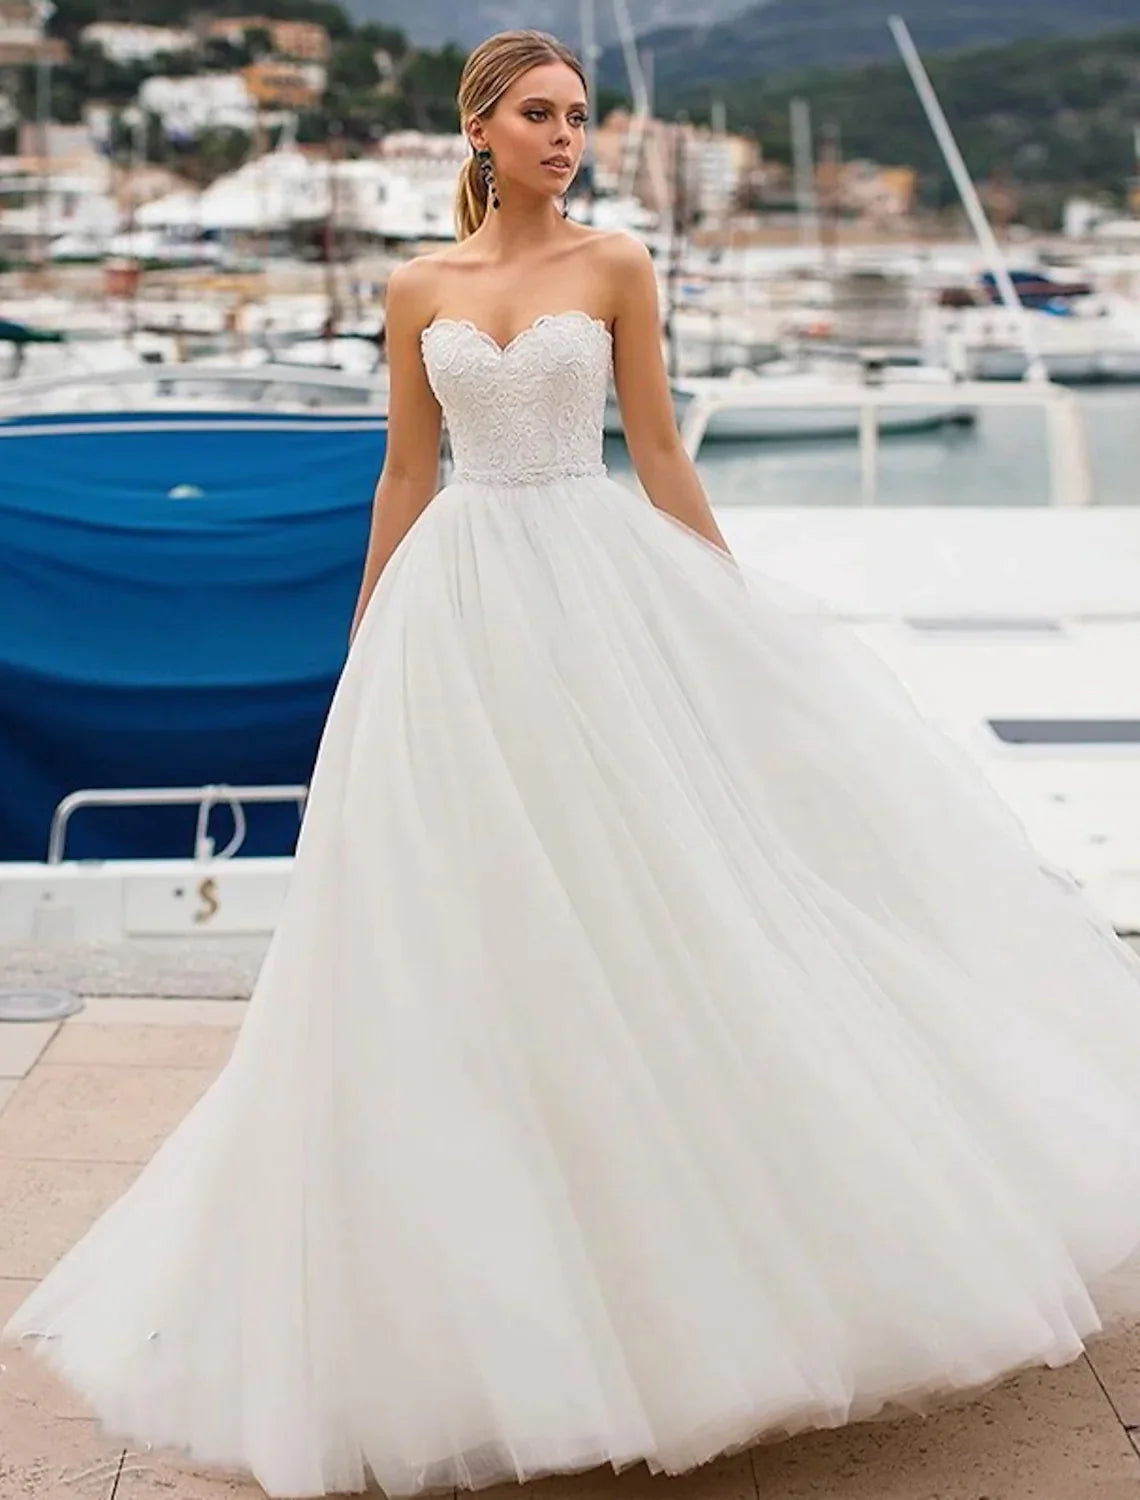 Beach Formal Wedding Dresses Ball Gown Strapless Strapless Lace